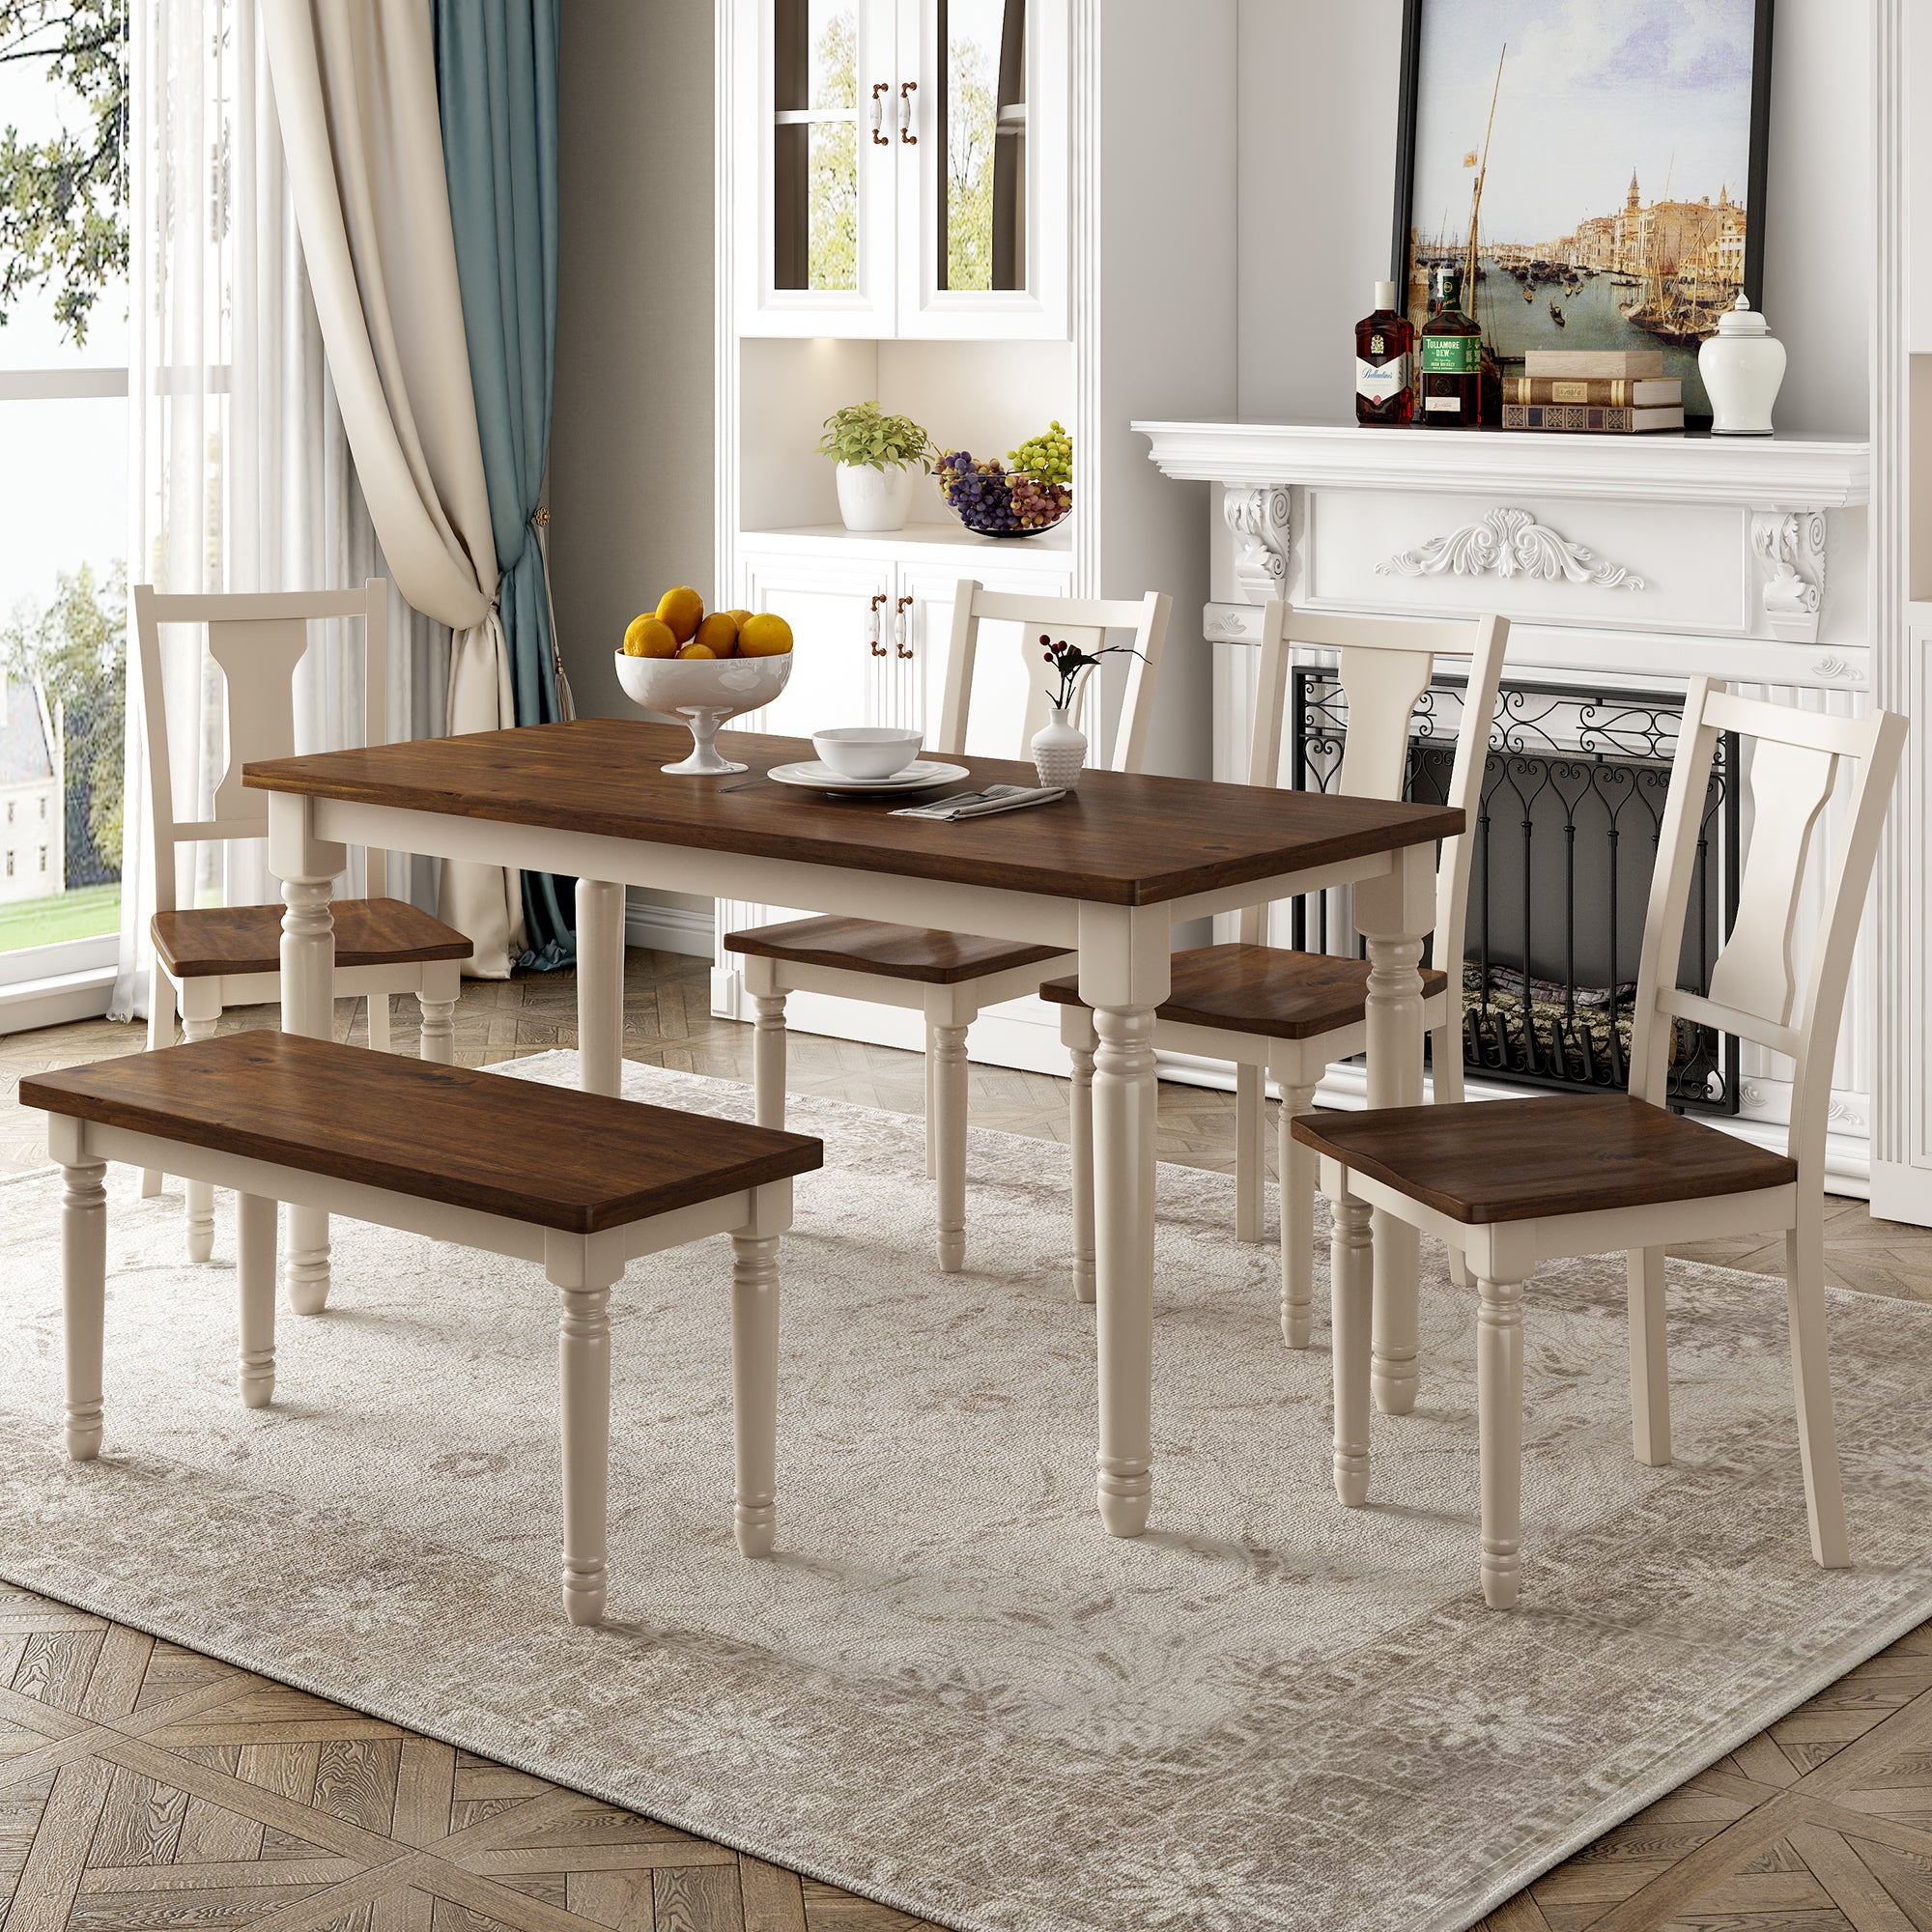 TREXM Classic 6-Piece Dining Set Wooden Table and 4 Chairs with Bench for Kitchen Dining Room (Brown+Cottage White)